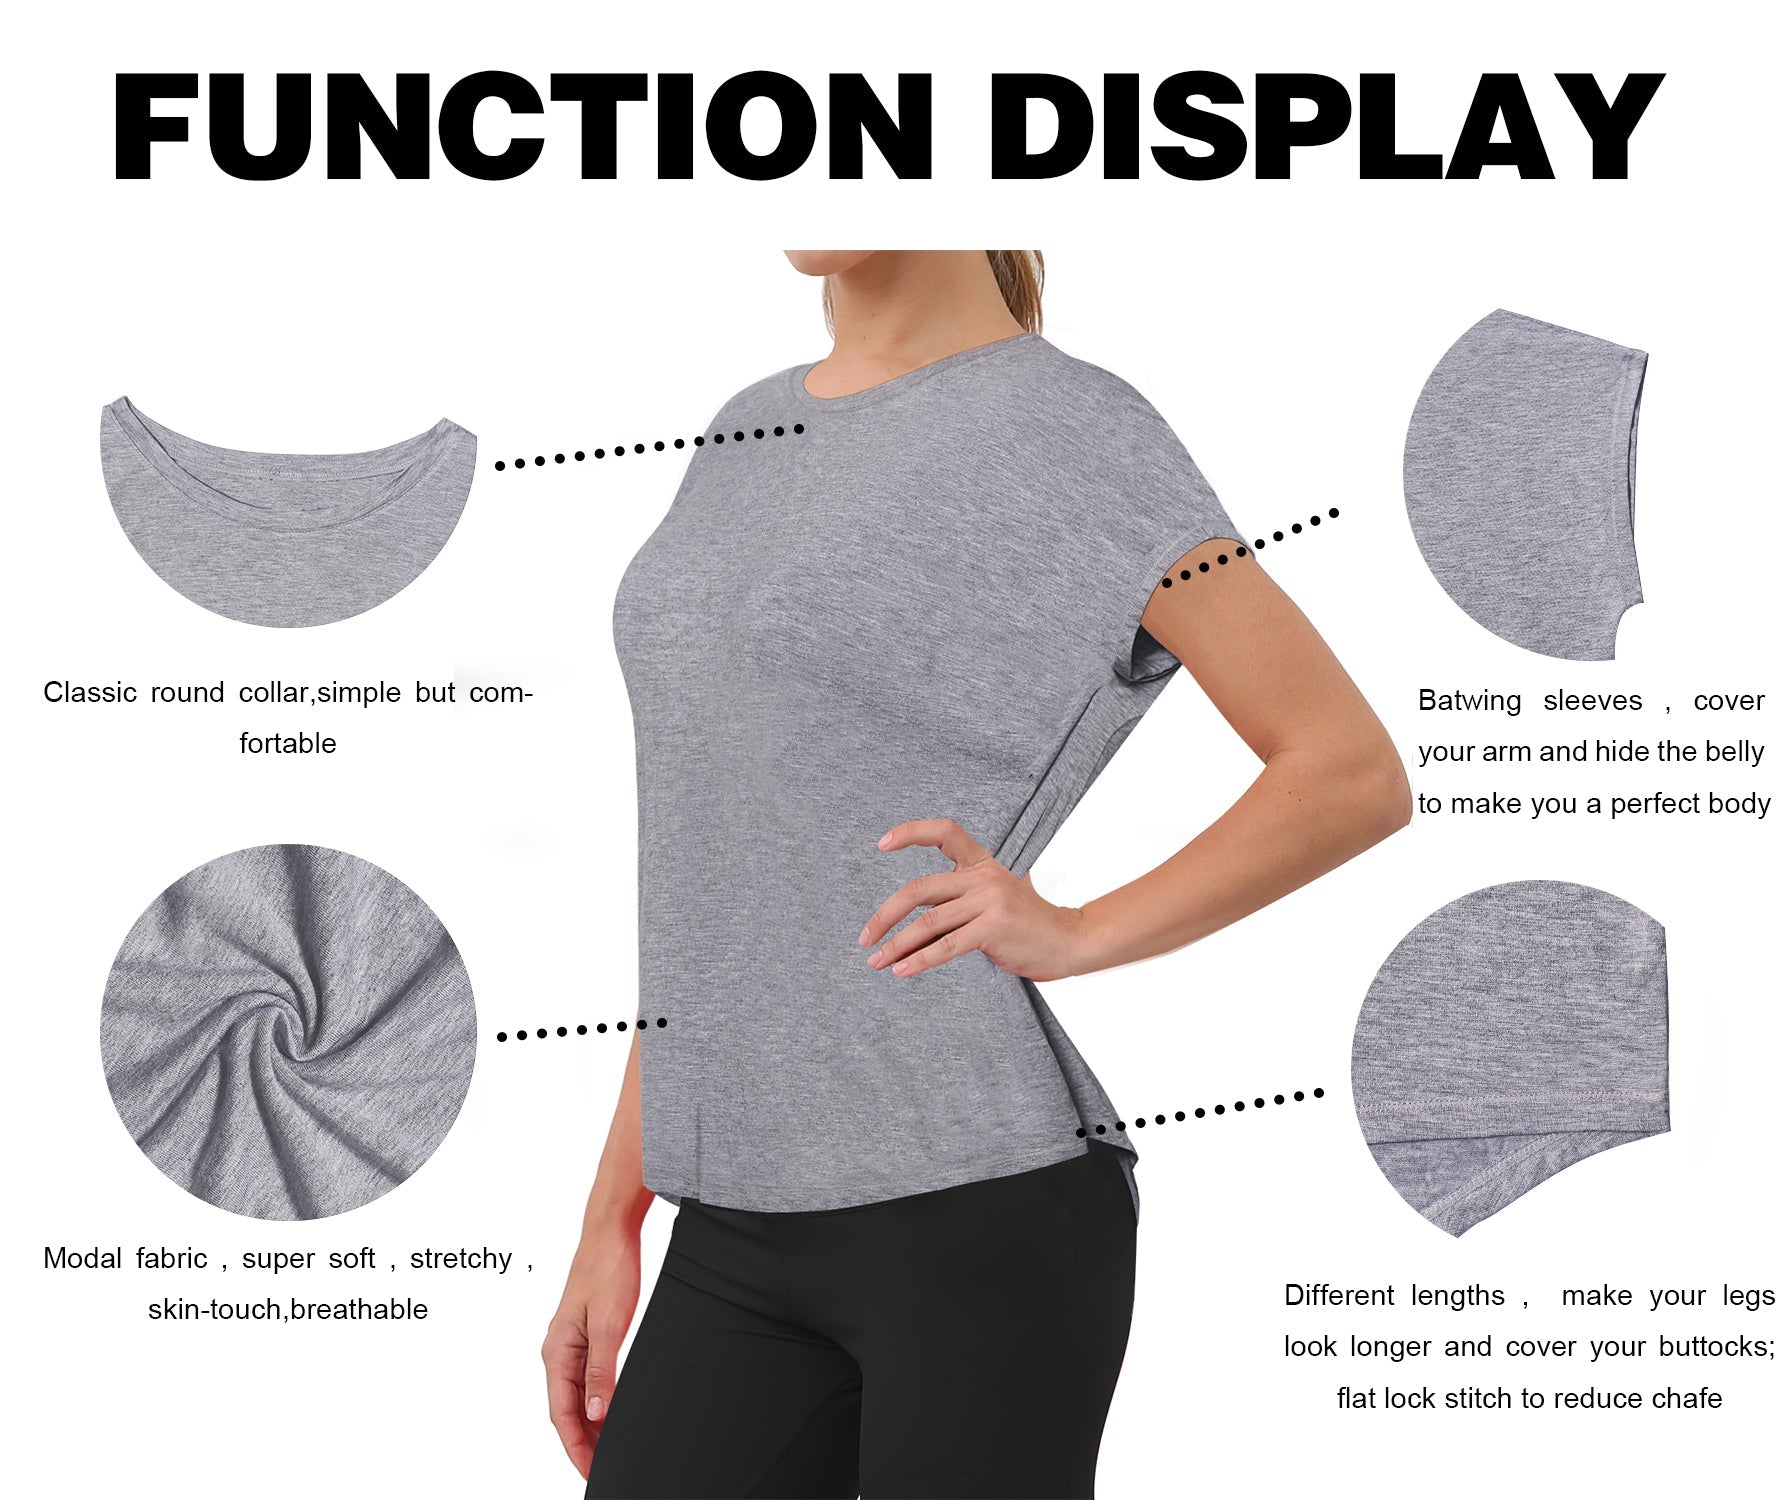 Hip Length Short Sleeve Shirt heathergray 93%Modal/7%Spandex Designed for Running Classic Fit, Hip Length An easy fit that floats away from your body Sits below the waistband for moderate, everyday coverage Lightweight, elastic, strong fabric for moisture absorption and perspiration, sports and fitness clothing.